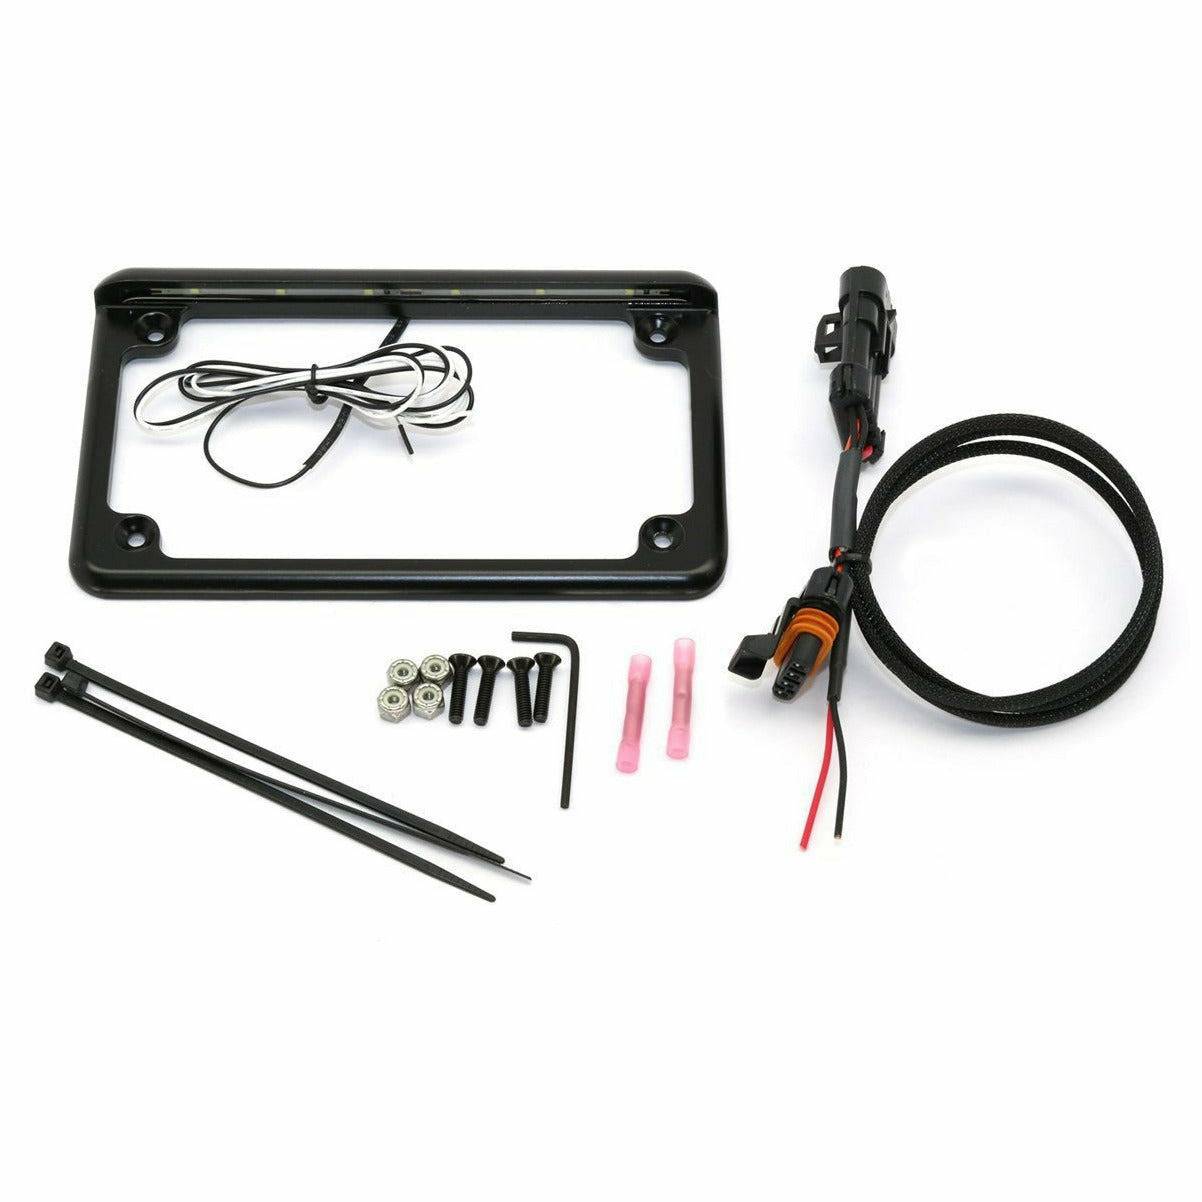 Polaris RZR Plug & Play Power Adapter with LED License Frame